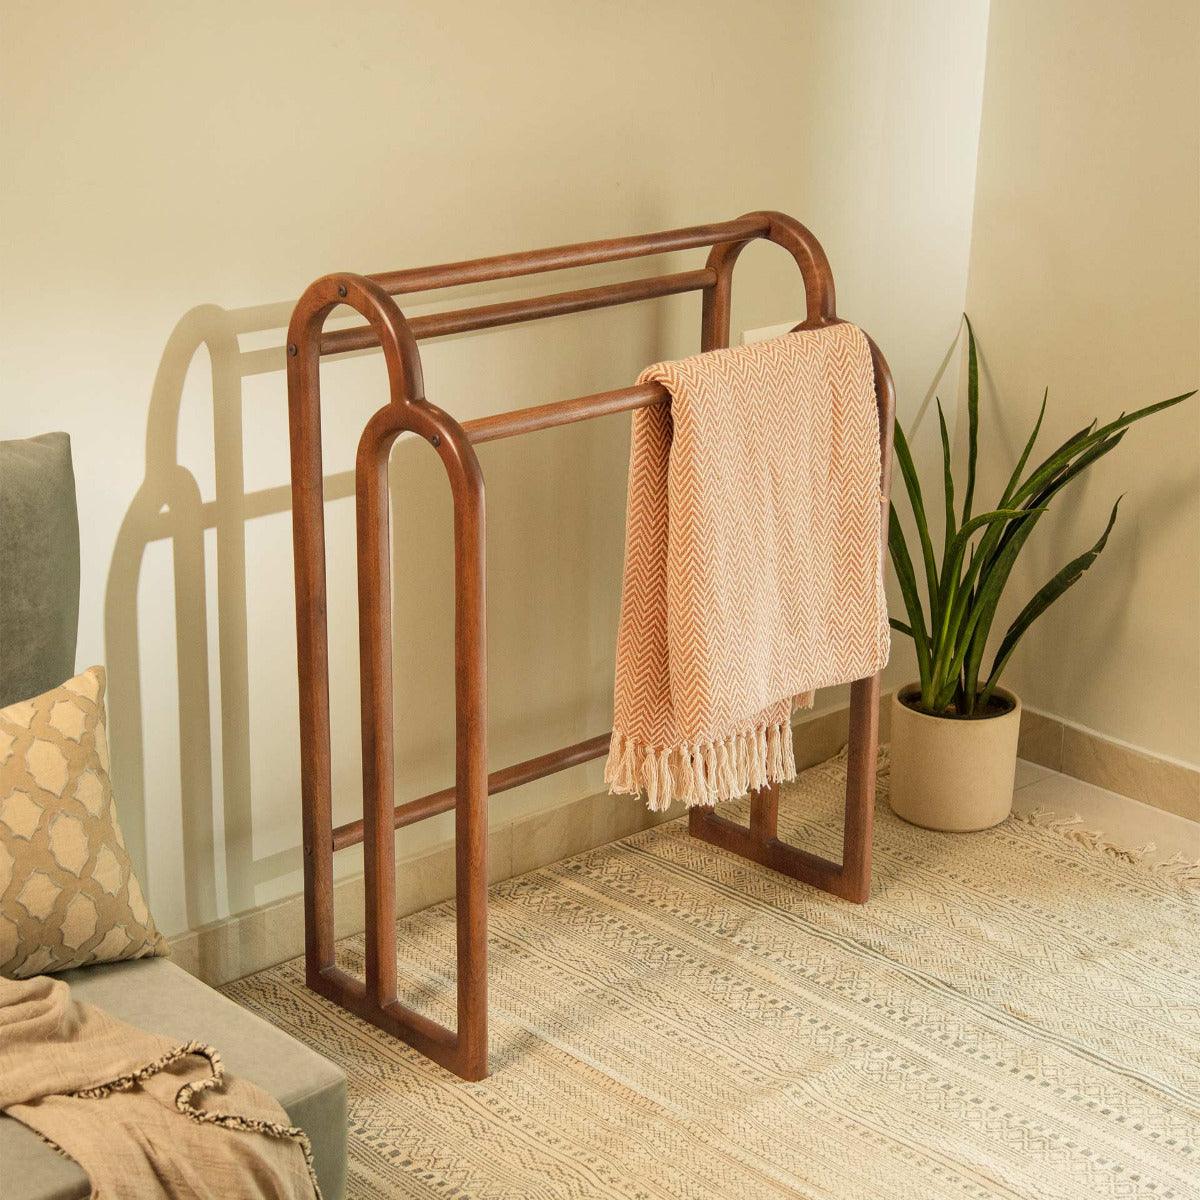 Old World ready-to-assemble towel holder